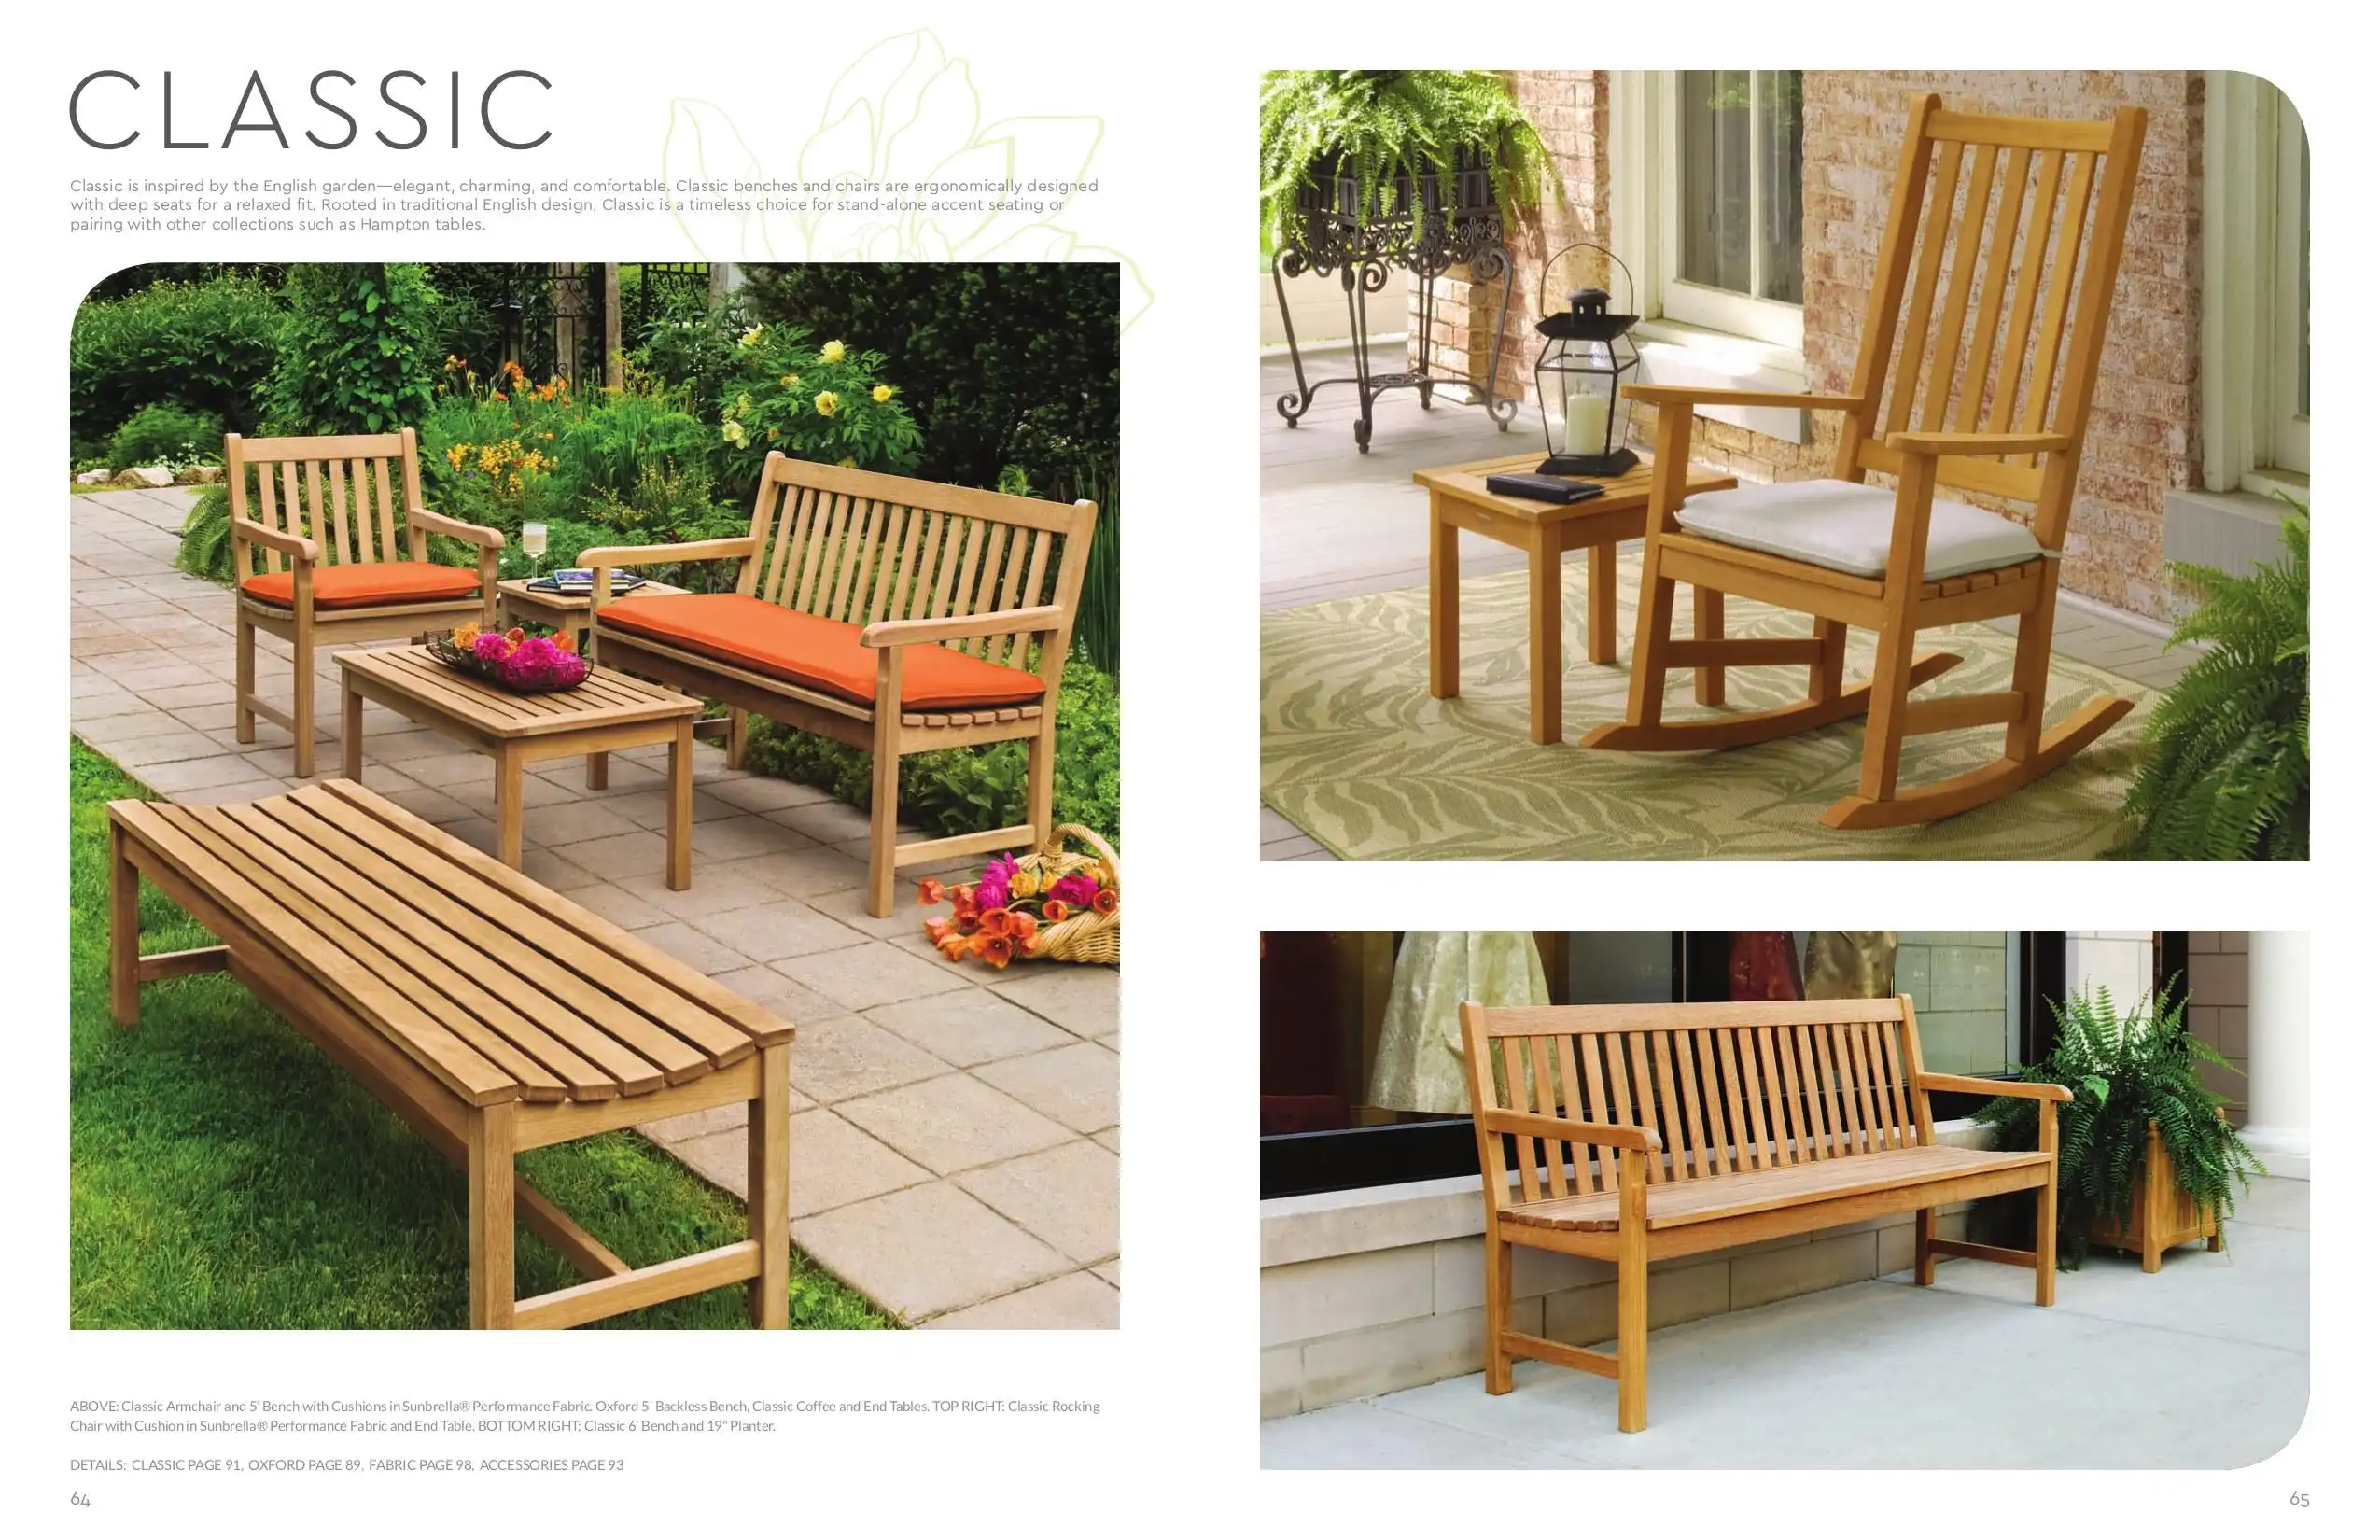 CLASSIC (1) Benches & Rocking Chair by Oxford Garden